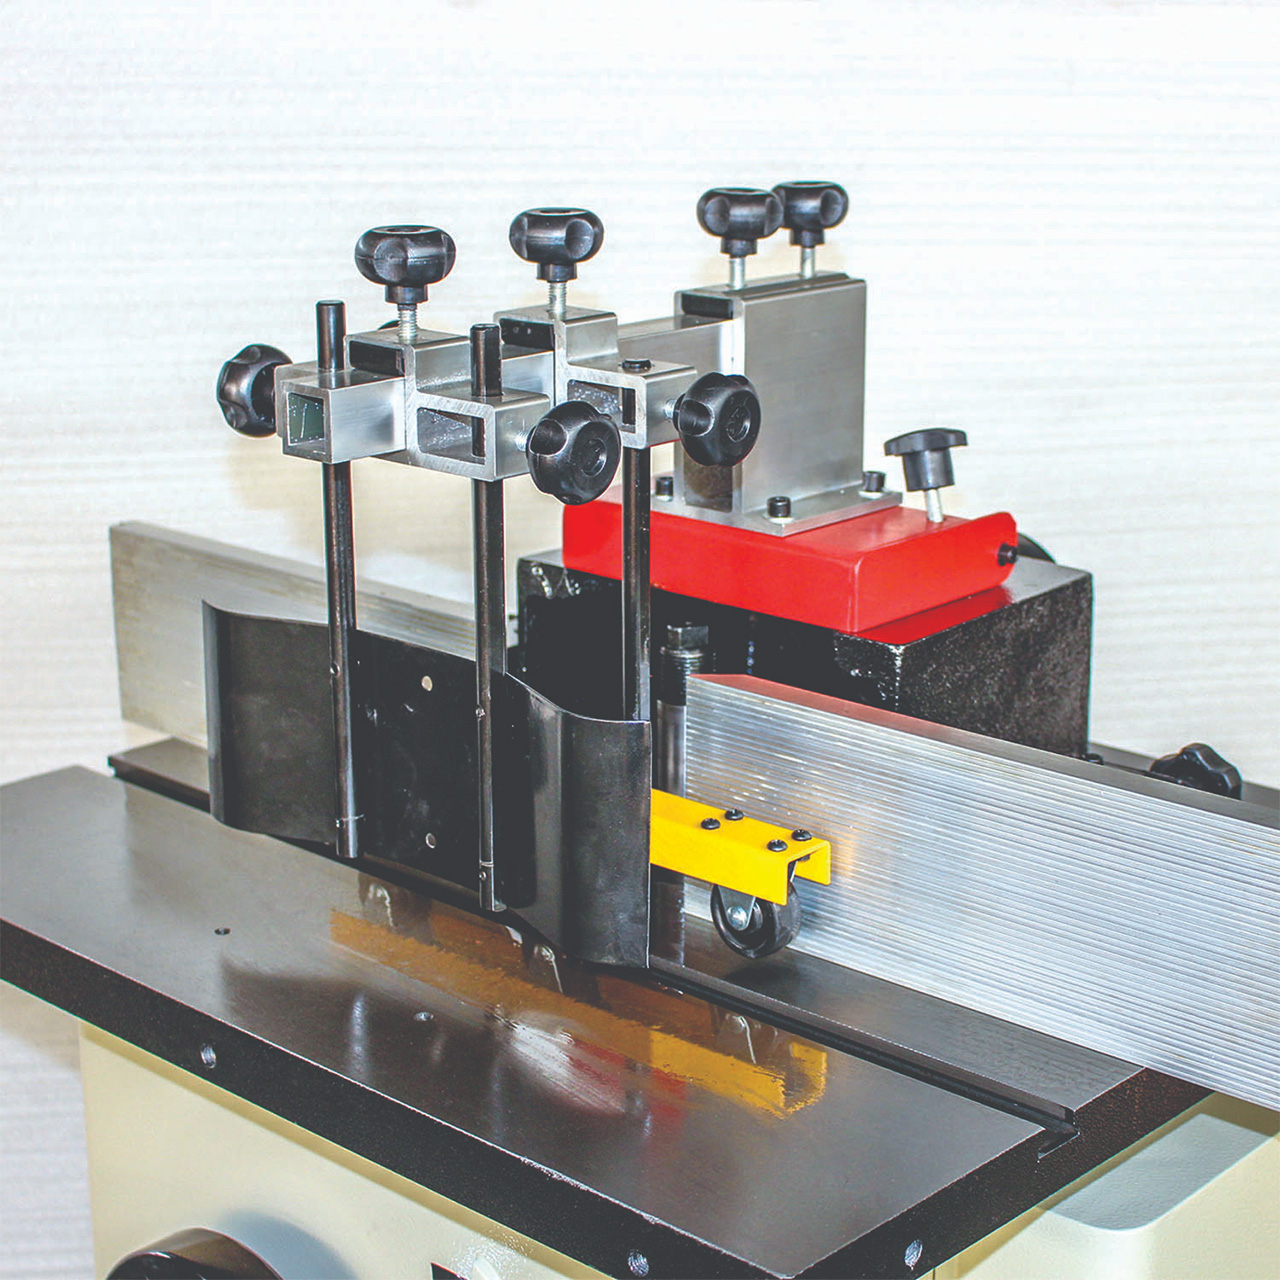 Brand new CAM-WOOD SP-35GX SHAPER (FIXED SPINDLE) for sale